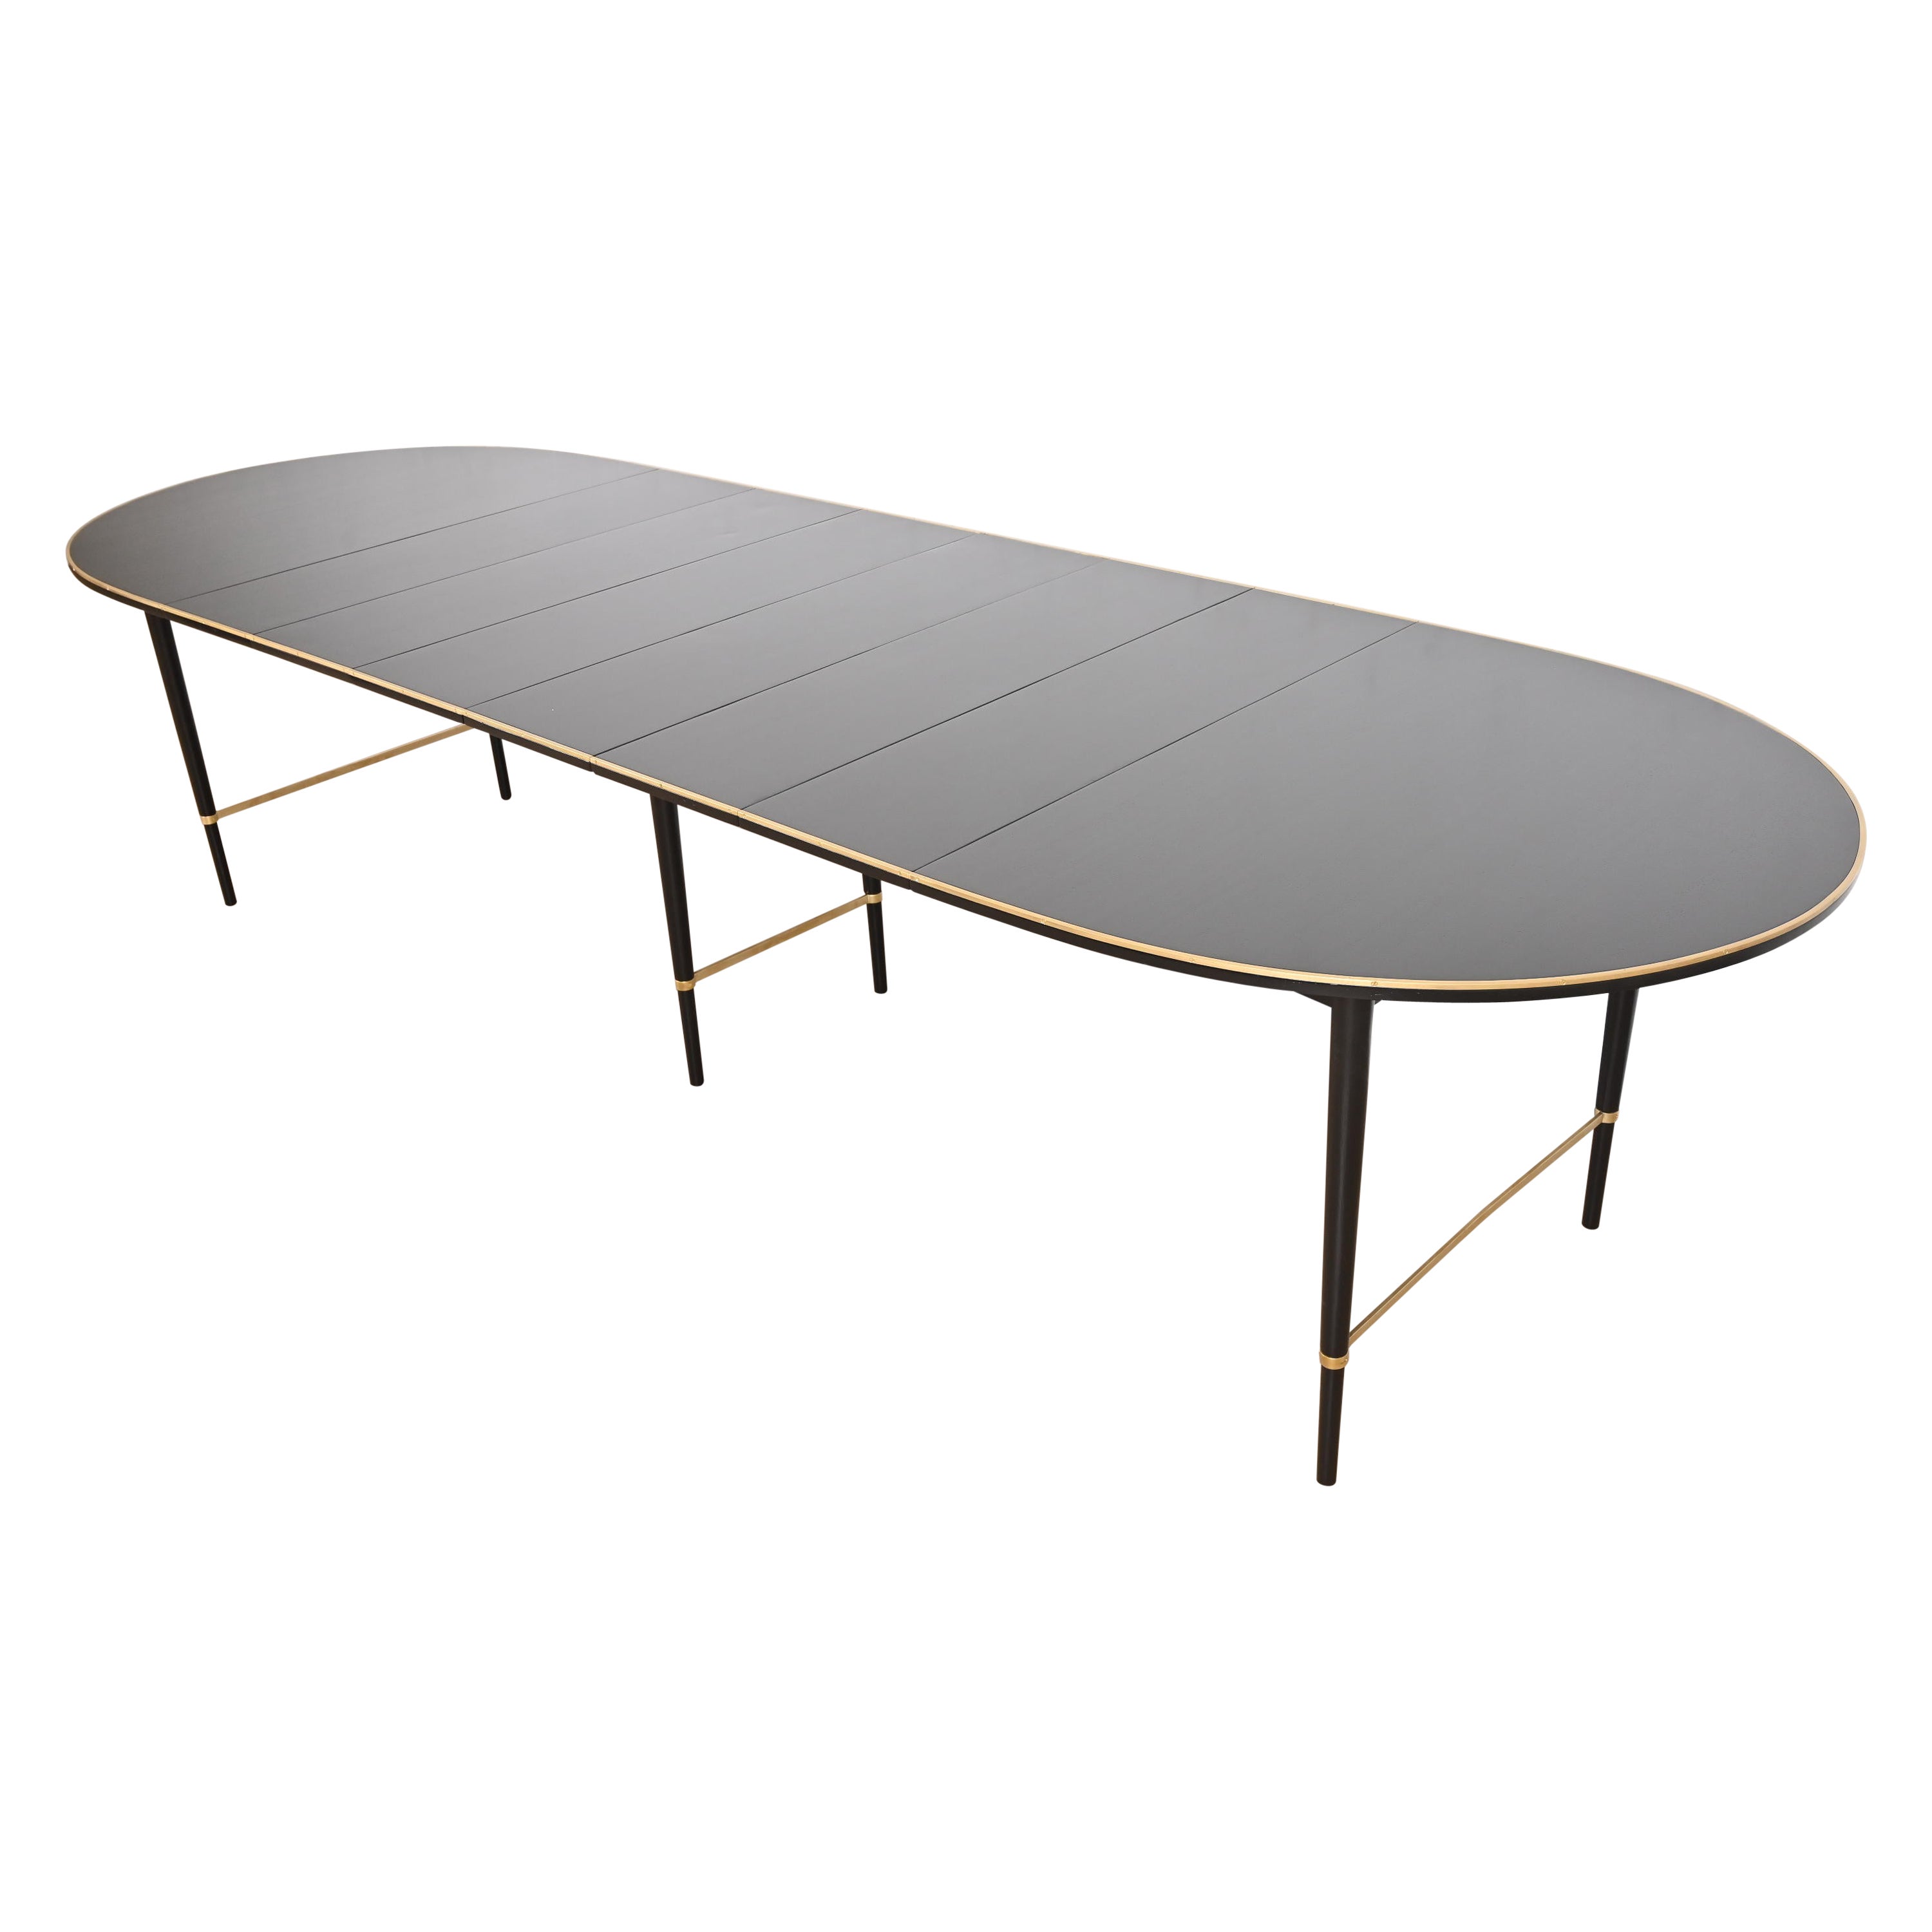 Paul McCobb Connoisseur Collection Black Lacquer and Brass Dining Table, 1950s